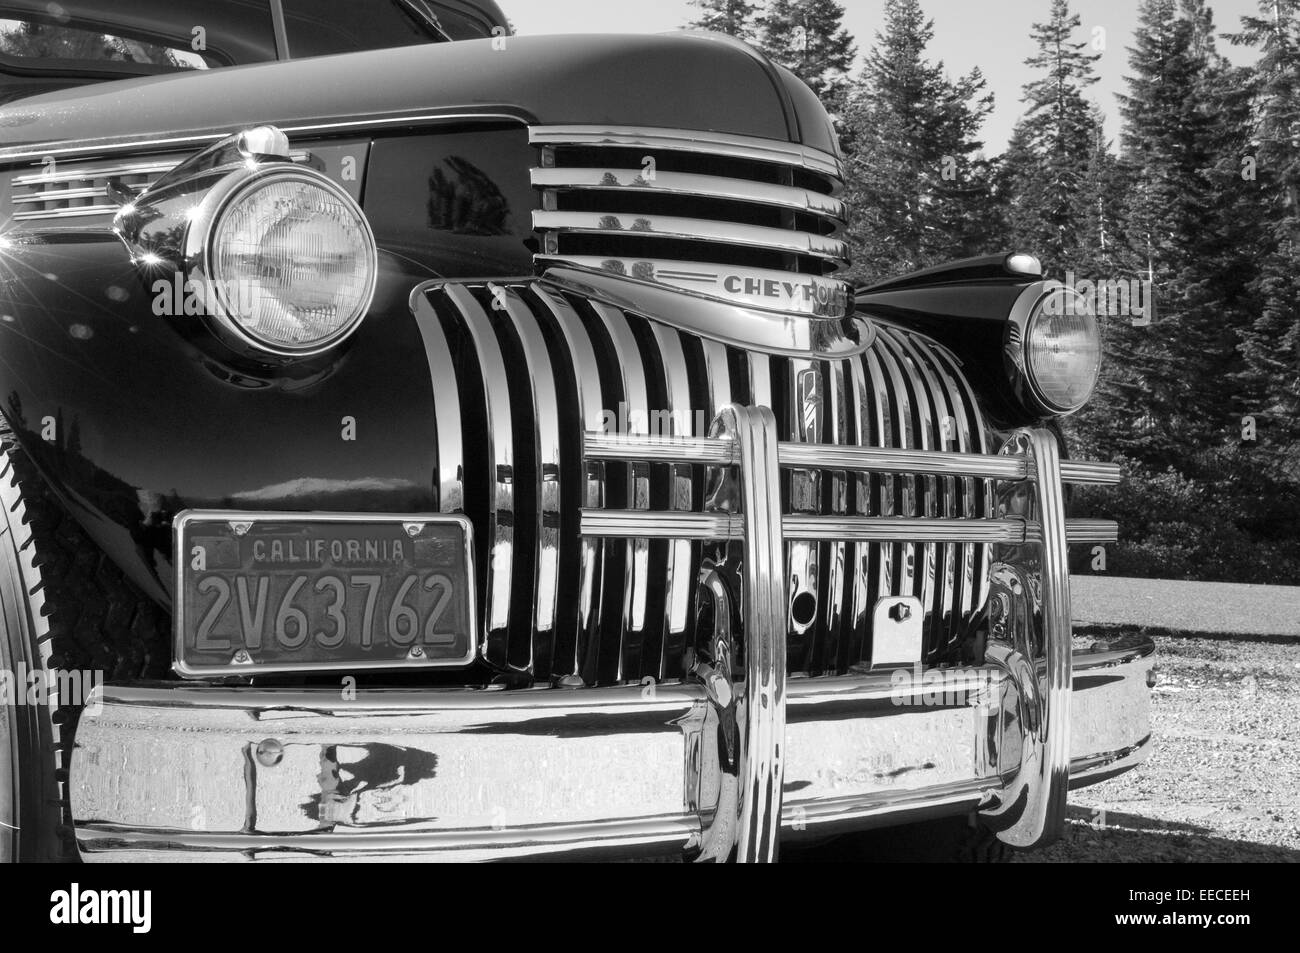 Immaculate 1950's sepia silver chrome Chevrolet pick up truck with Christmas Wreath on fender Mount Shasta & redwoods Stock Photo